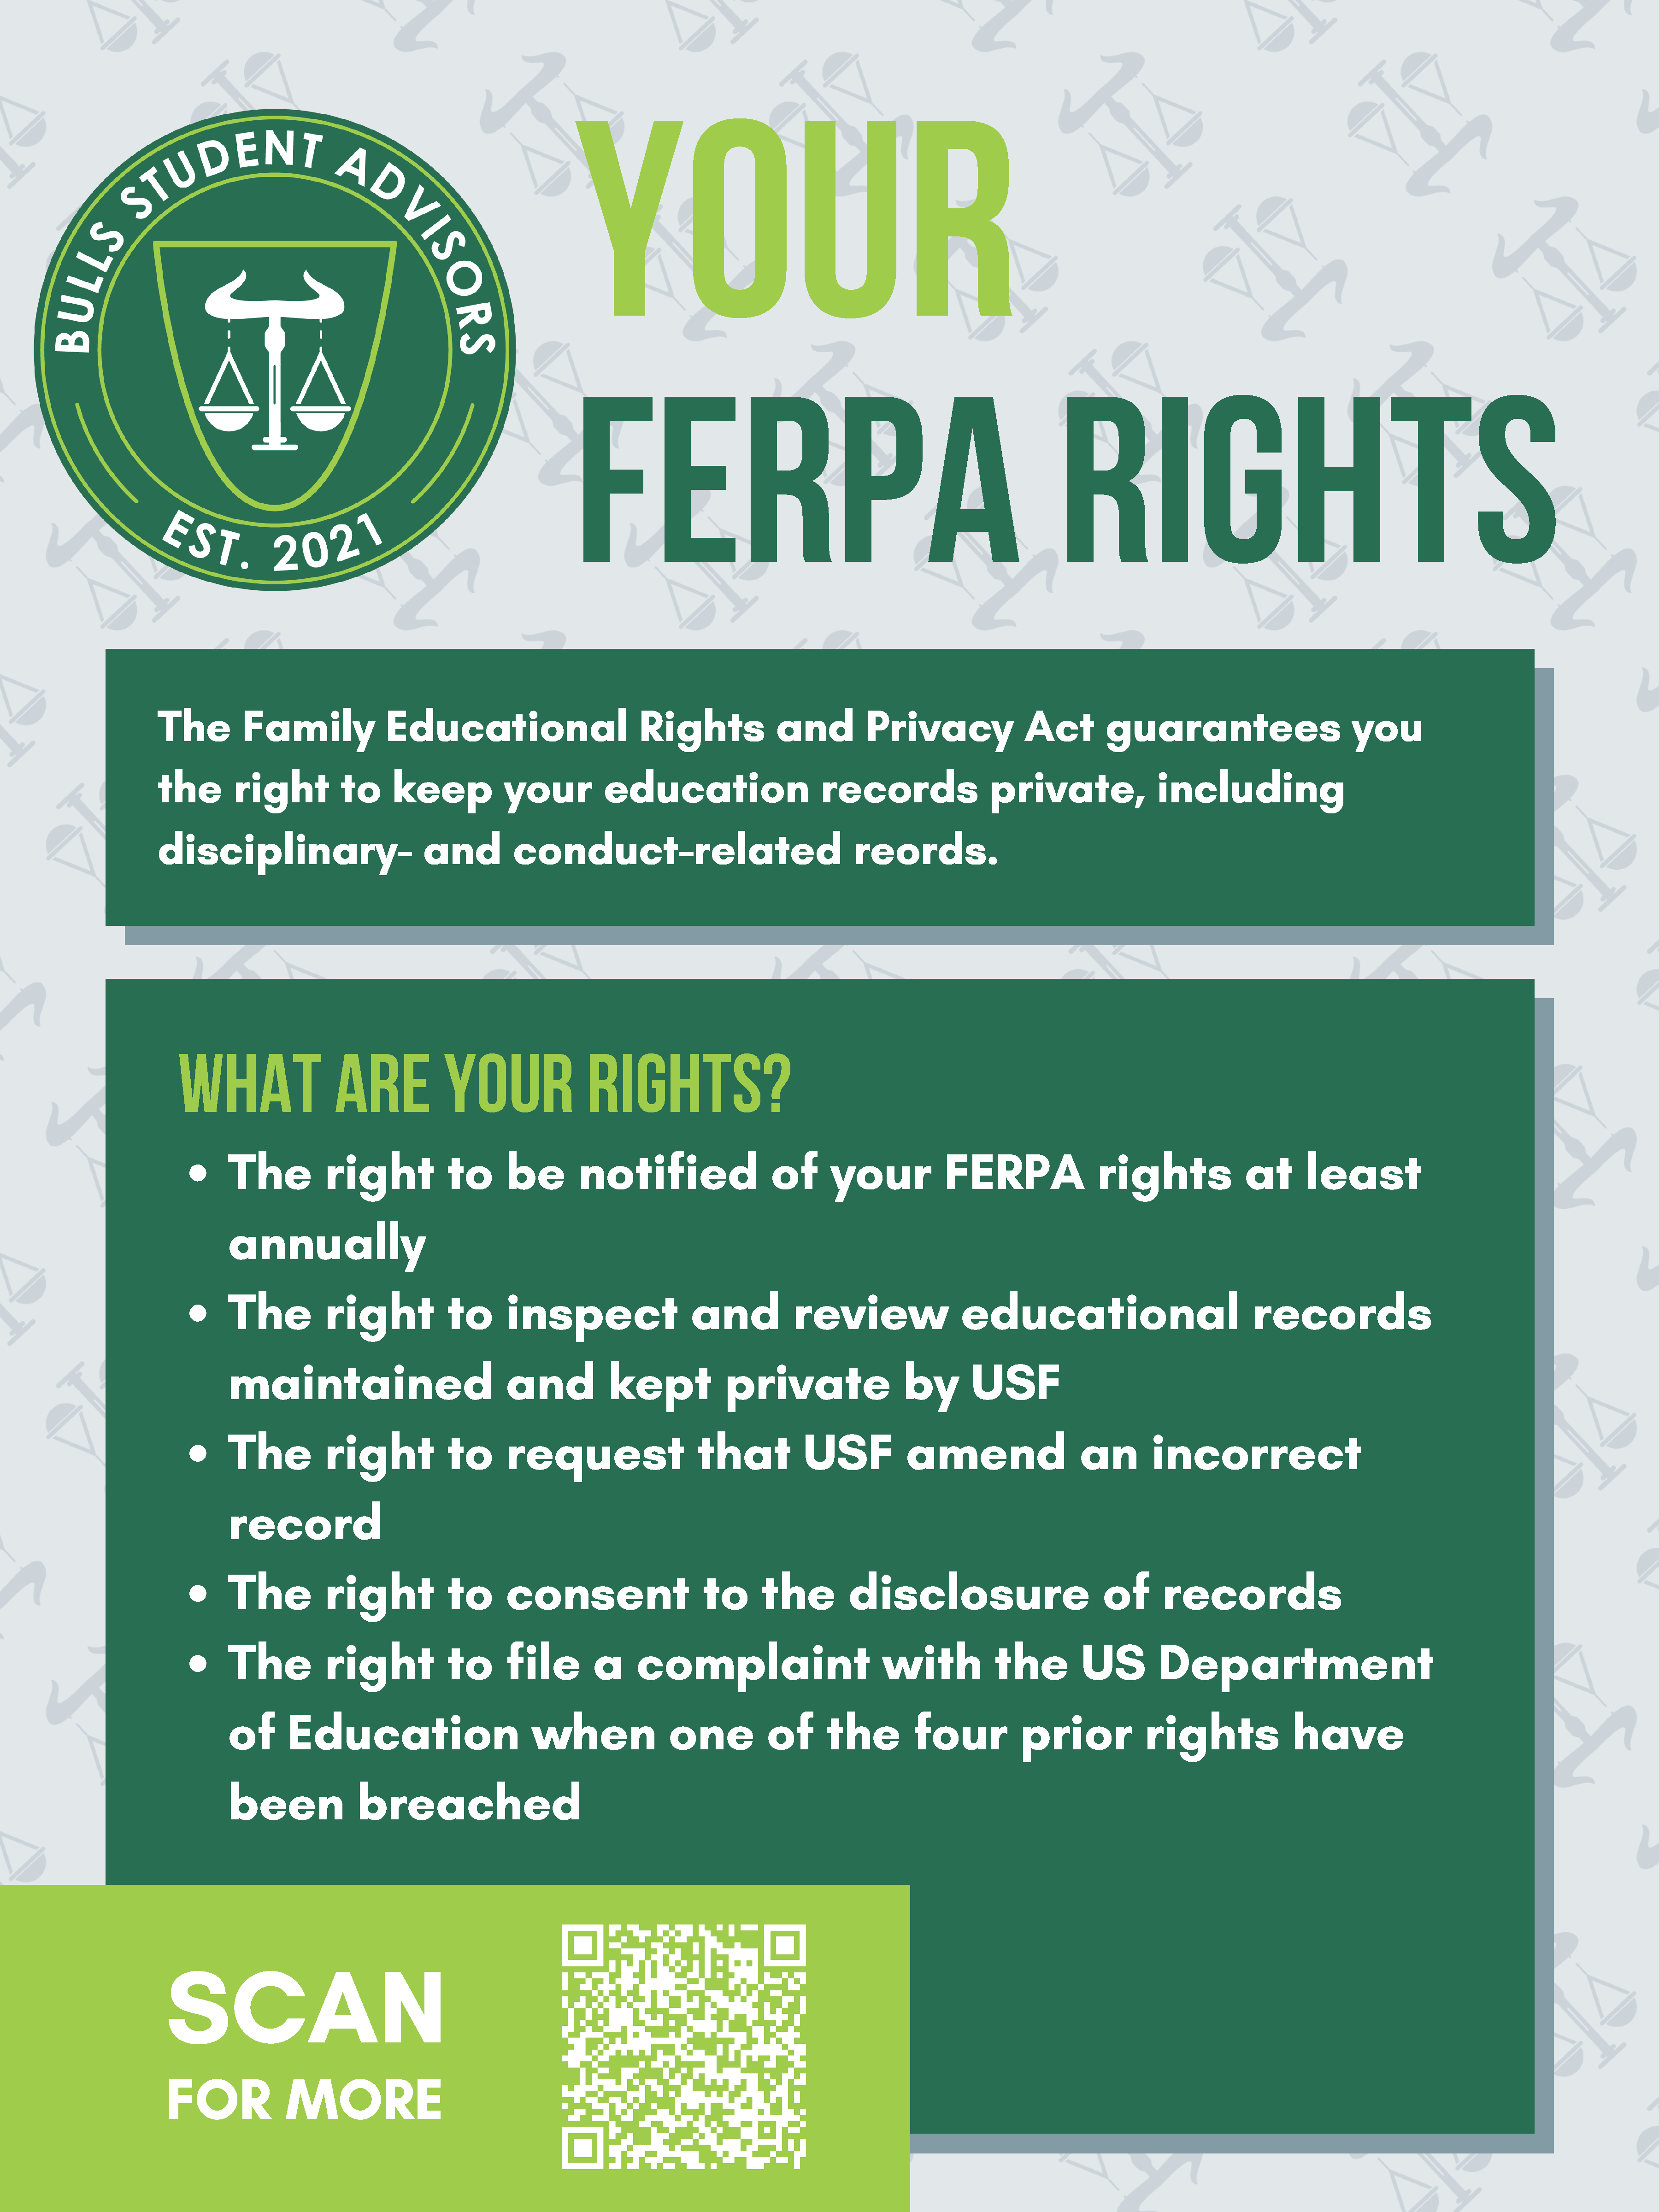 Ferpa Rights. The Family Educational Rights and Privacy Act guarantees you the right to keep your education records private, including disciplinary- and conduct-related records. What are your rights?The right tobenotifiedofyourFERPA rightsatleastannually The right toinspect and revieweducational recordsmaintainedand keptprivate byUSF The right torequest thatUSF amend anincorrectrecord The right toconsent tothe disclosureofrecords The right to file a complaint with the US Departmentof Education when one of the four prior rights have been breached. 